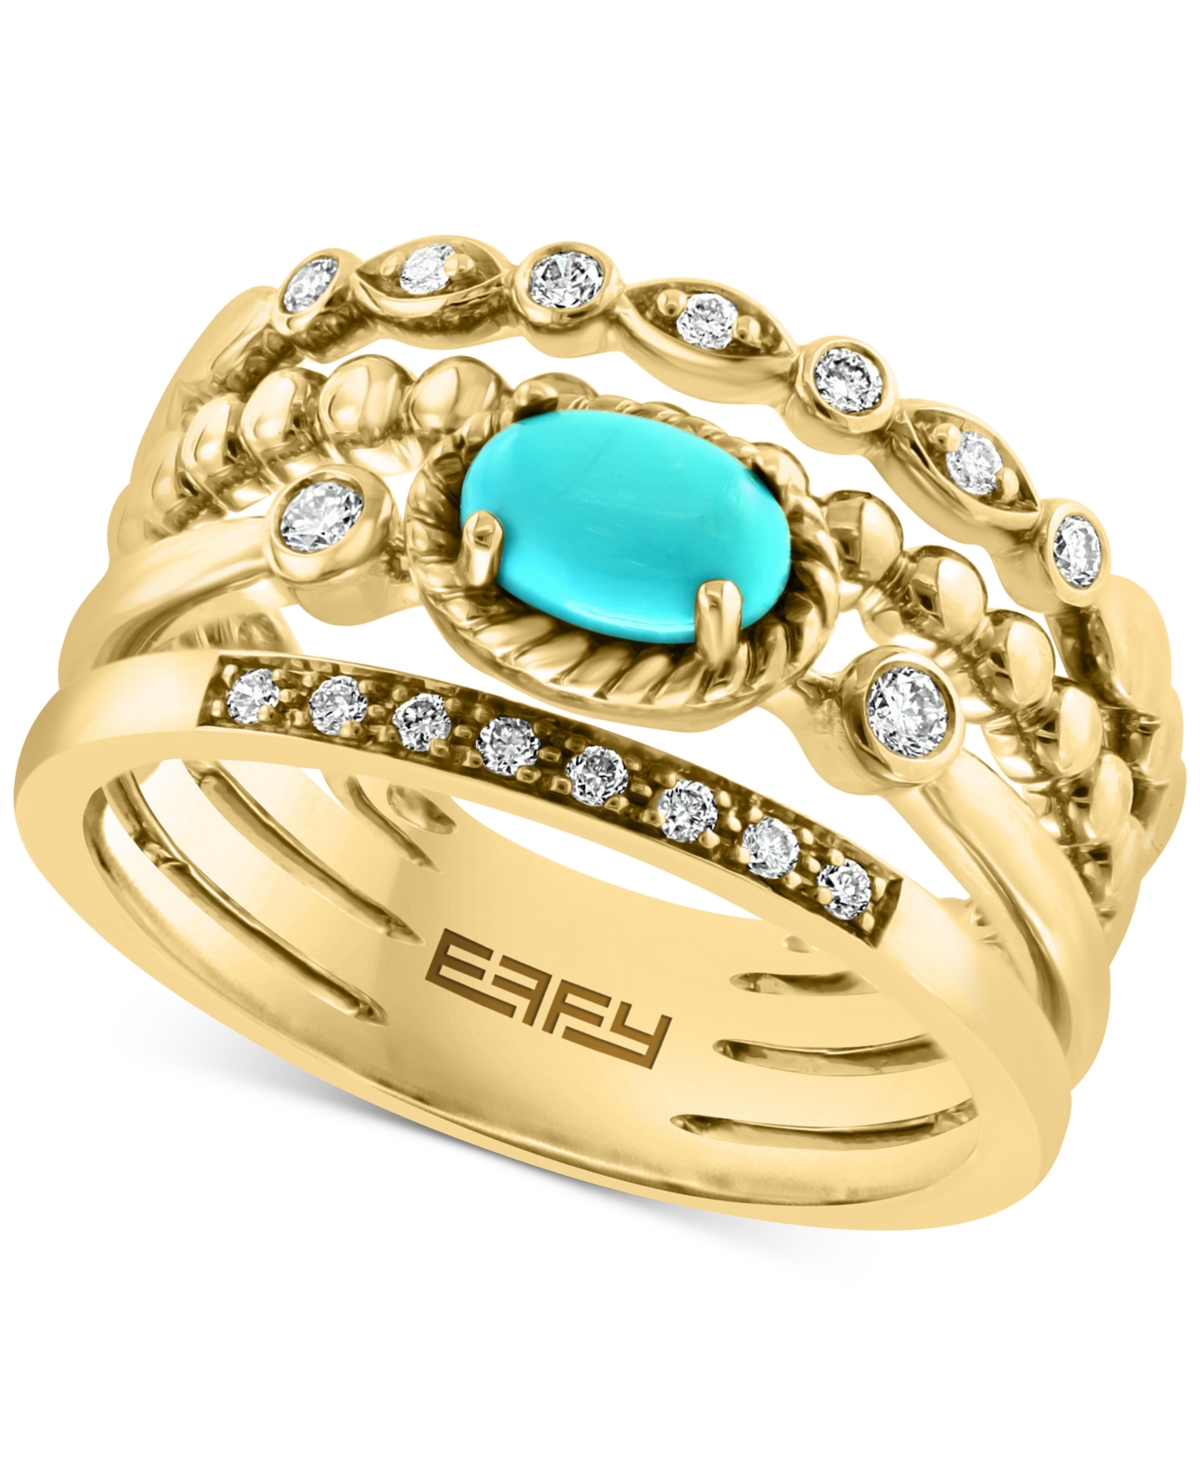 Effy Collection Effy Turquoise & Diamond (1/6 ct. t.w.) Multirow Ring in 14k Gold